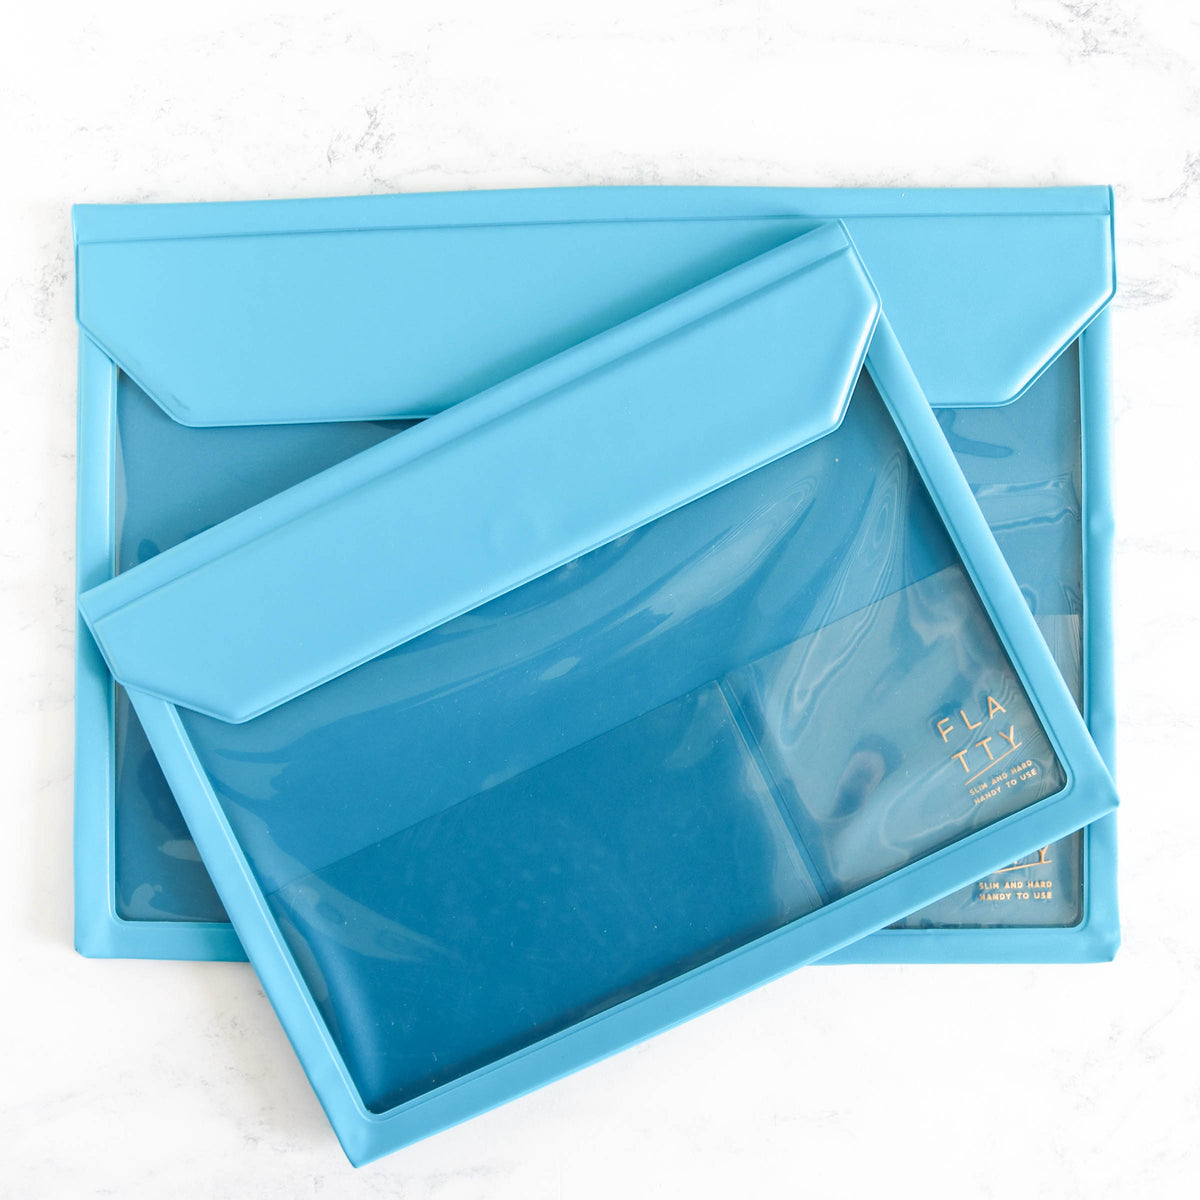 Flatty Project Carrying Case - Bright Blue